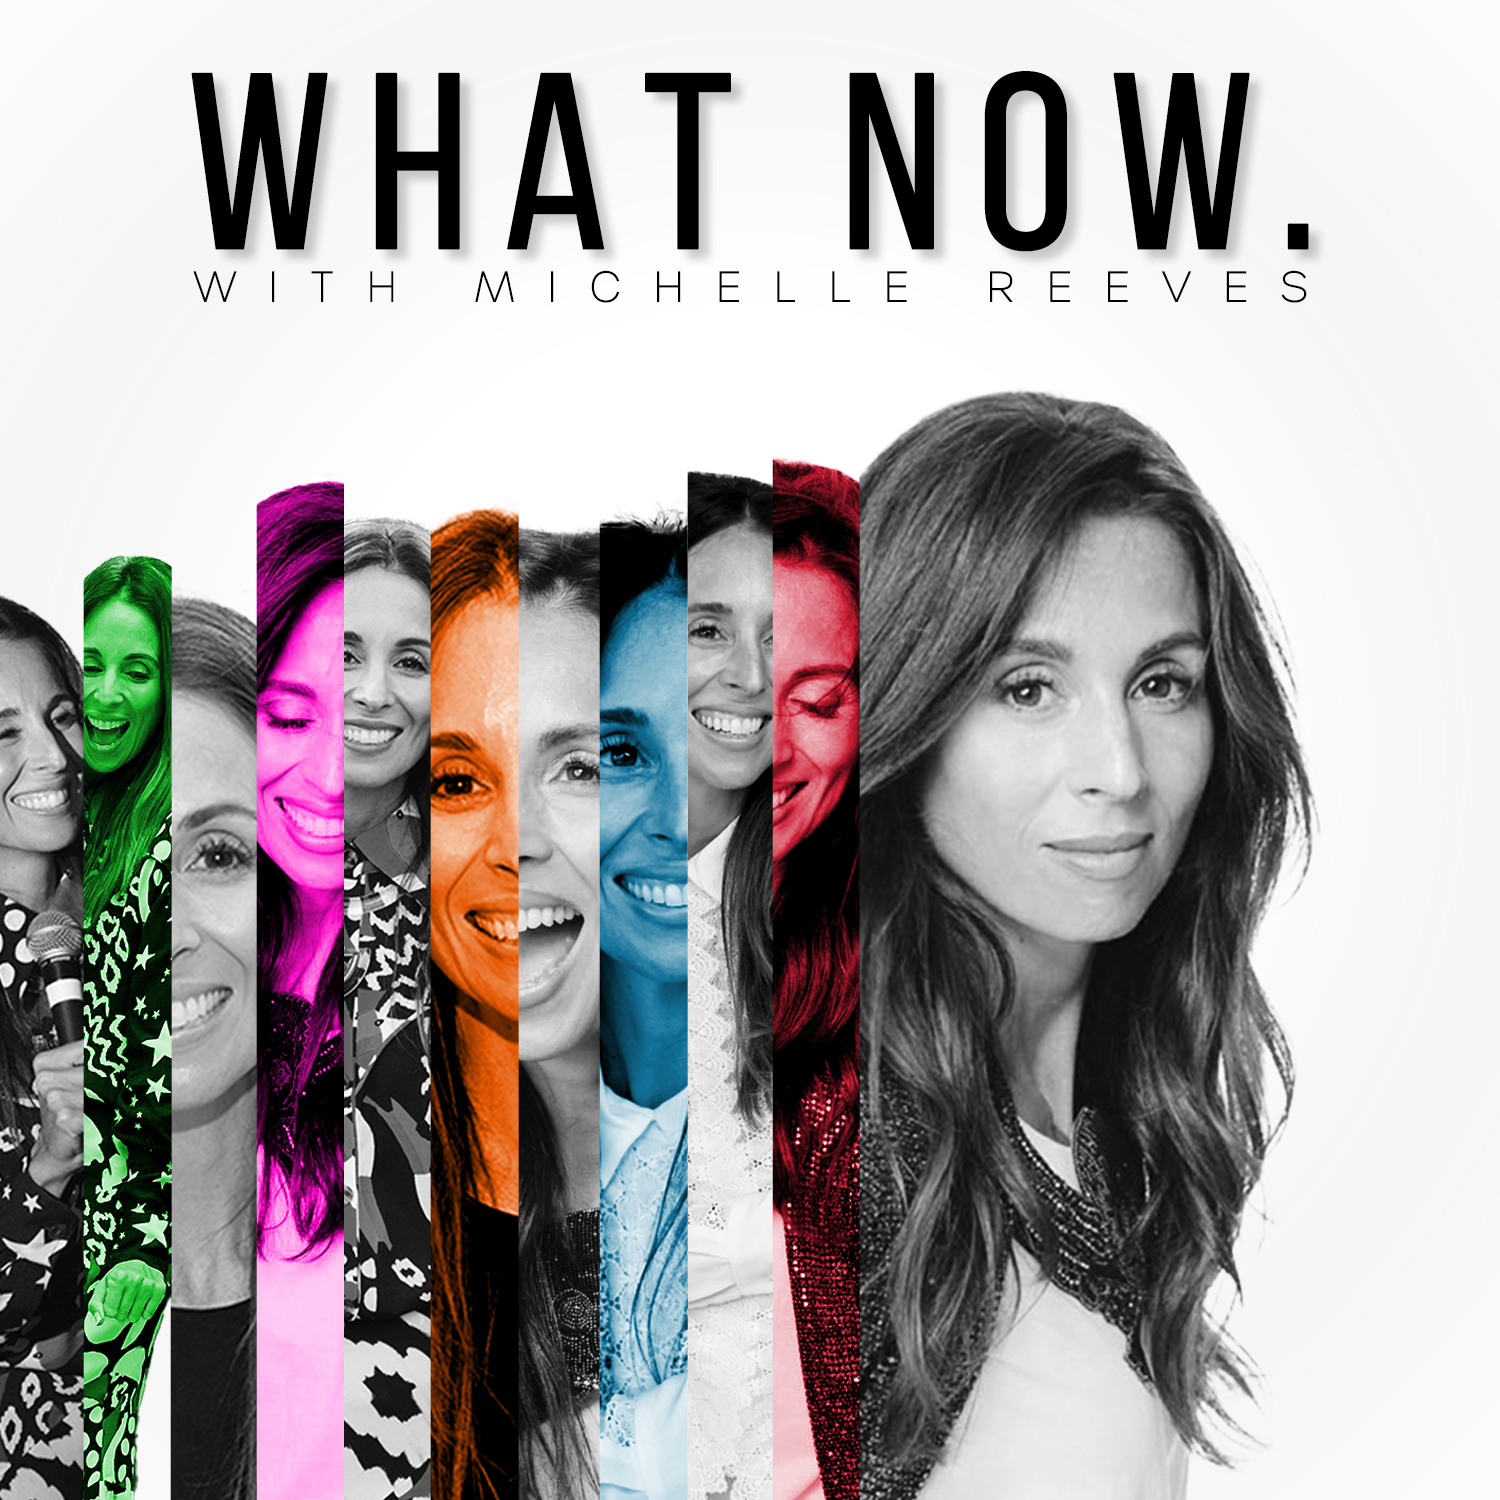 Michelle Reeves - Artwork for Podcast - "What Now"